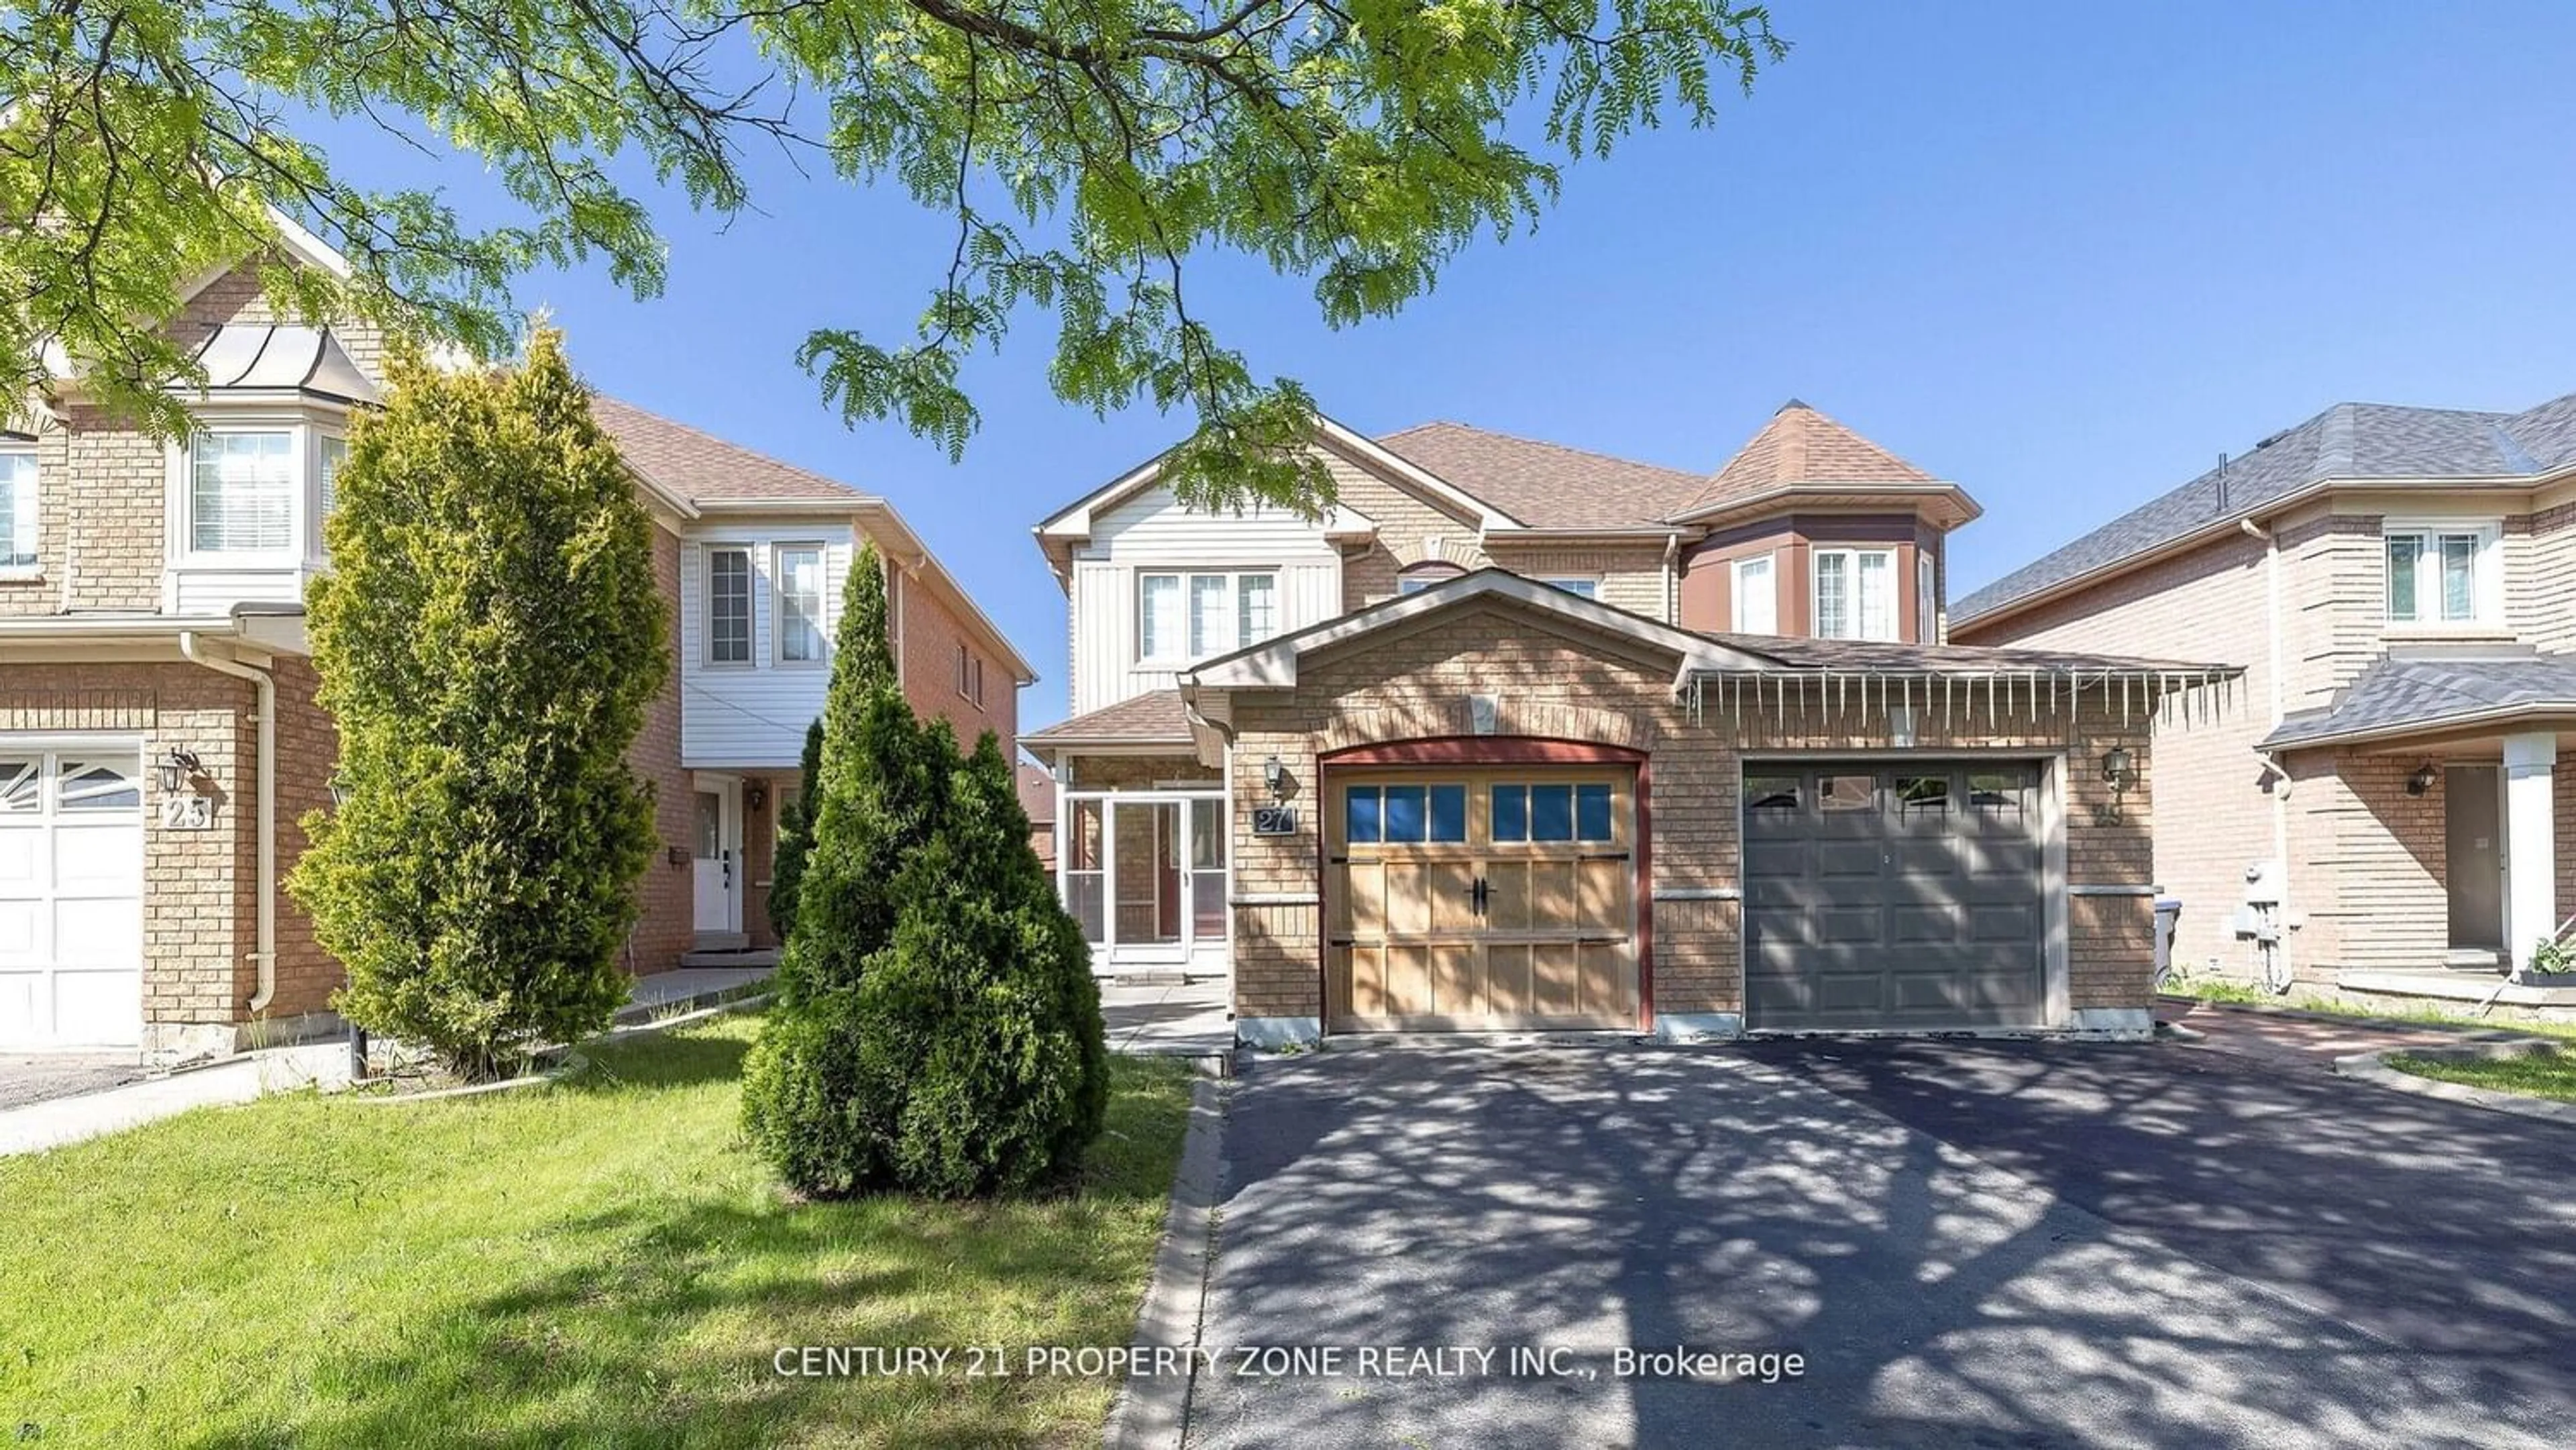 Frontside or backside of a home for 27 Coachwhip Rd, Brampton Ontario L6R 1X9